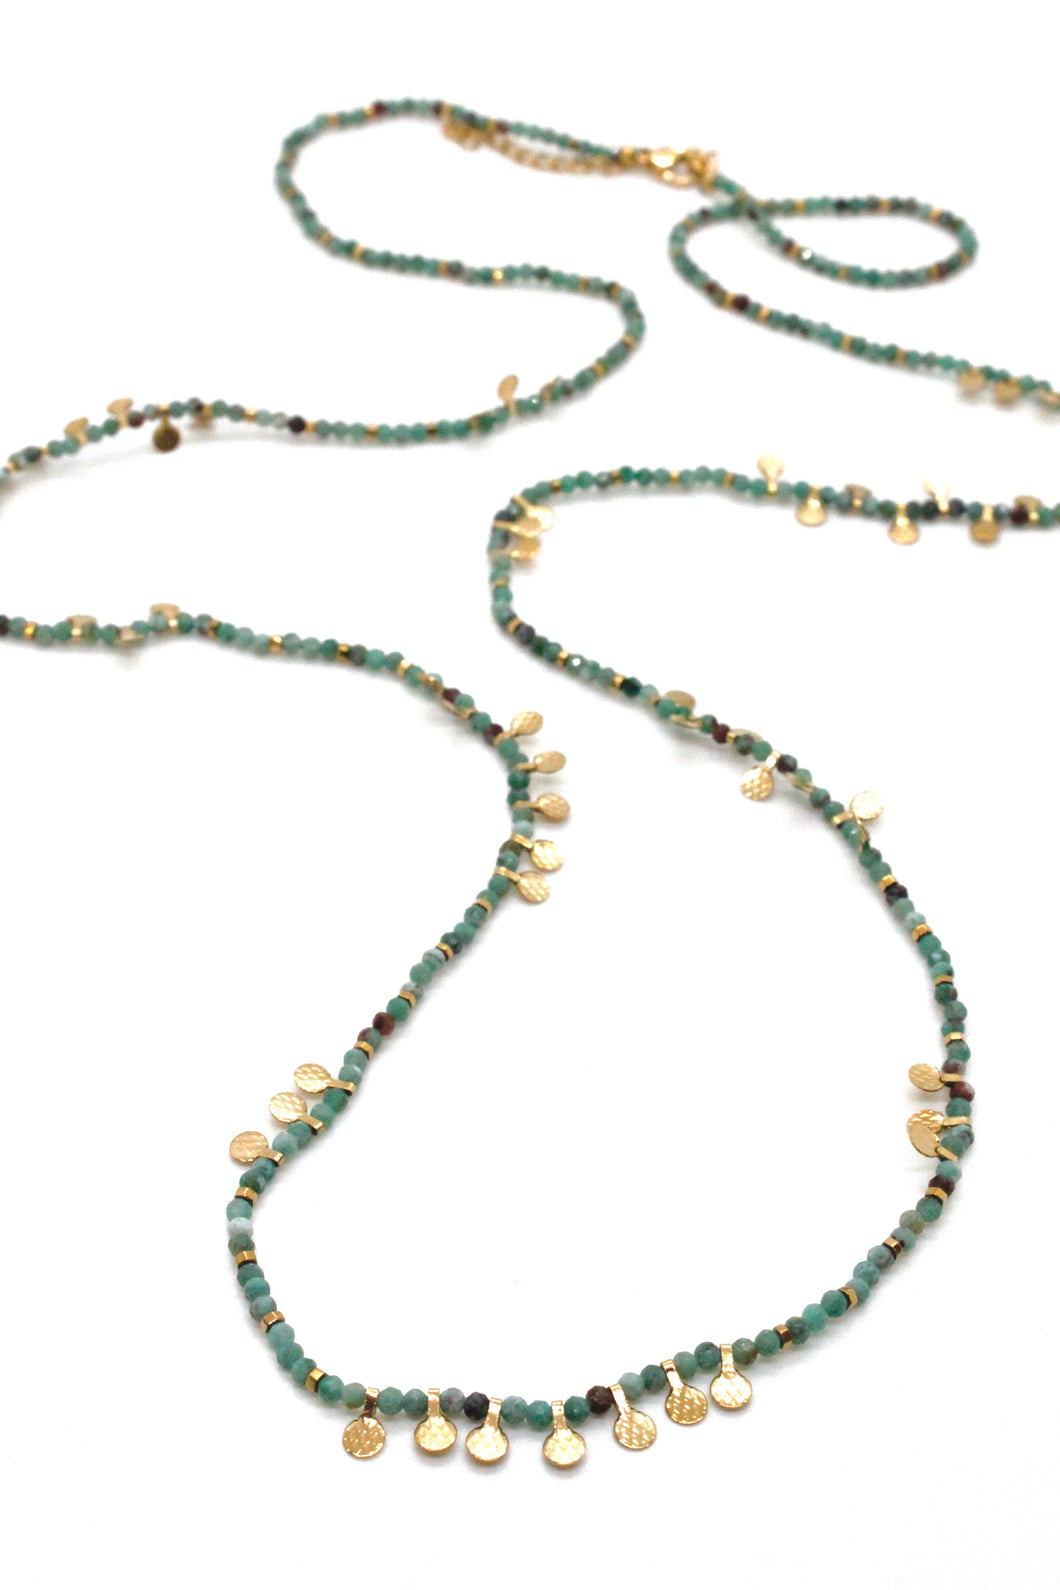 Museum Style Chrysocolla Stone Mix Necklace with 24K Gold Plate Mini Charms -French Flair Collection- N2-2339